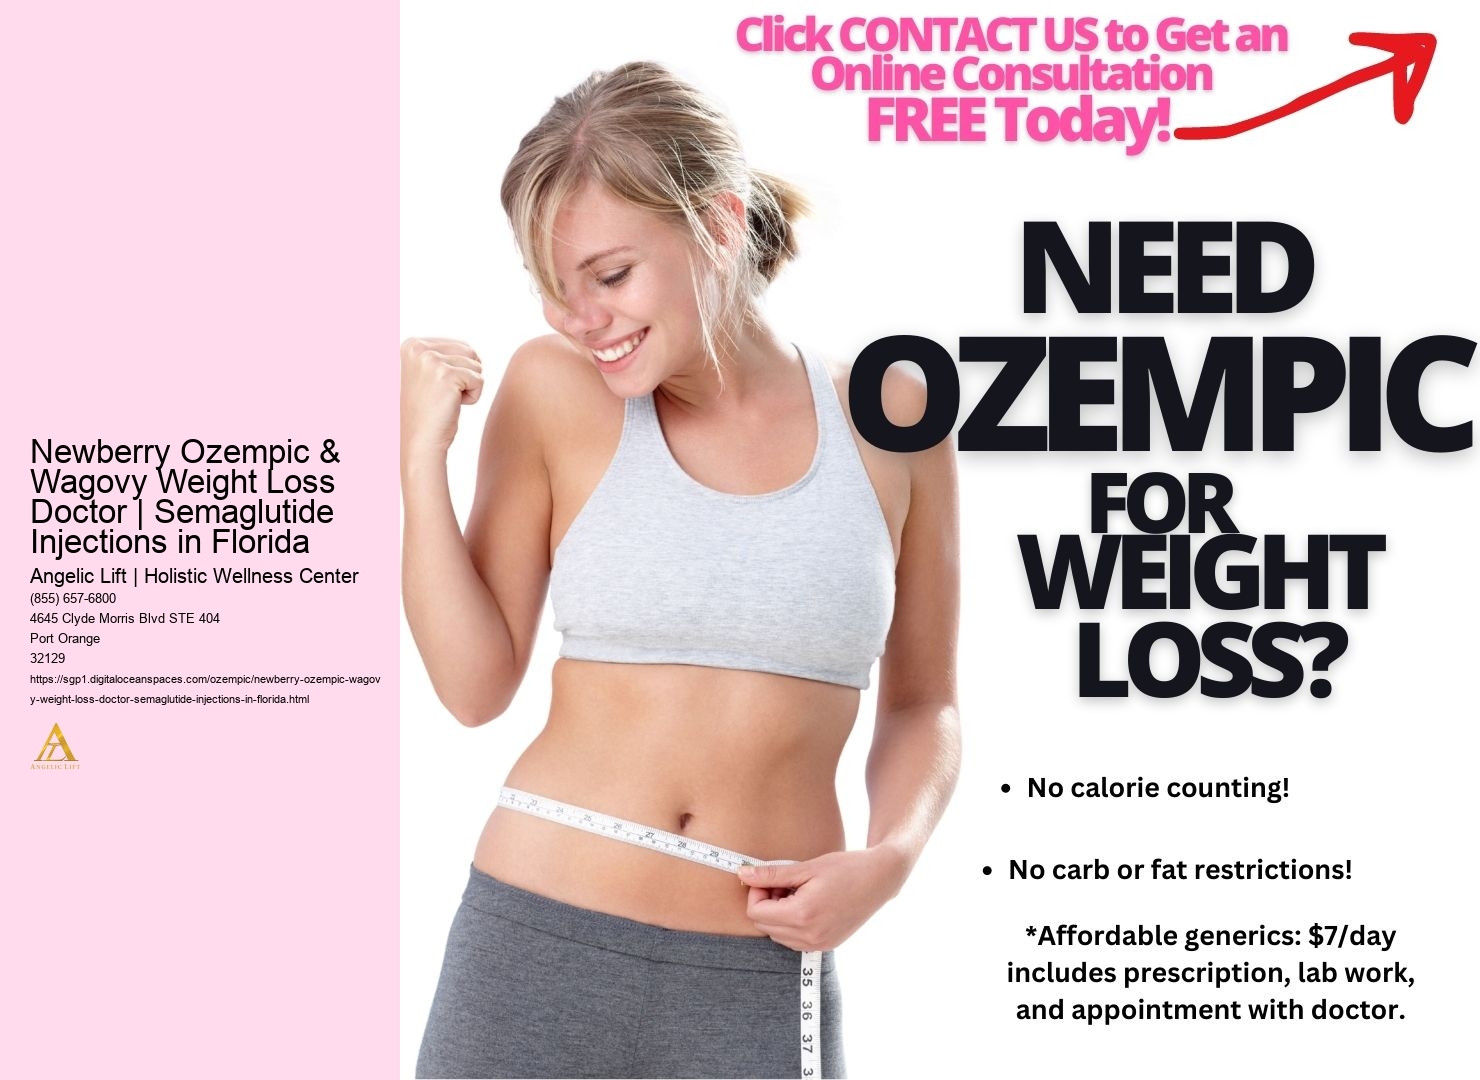 Newberry Ozempic & Wagovy Weight Loss Doctor | Semaglutide Injections in Florida